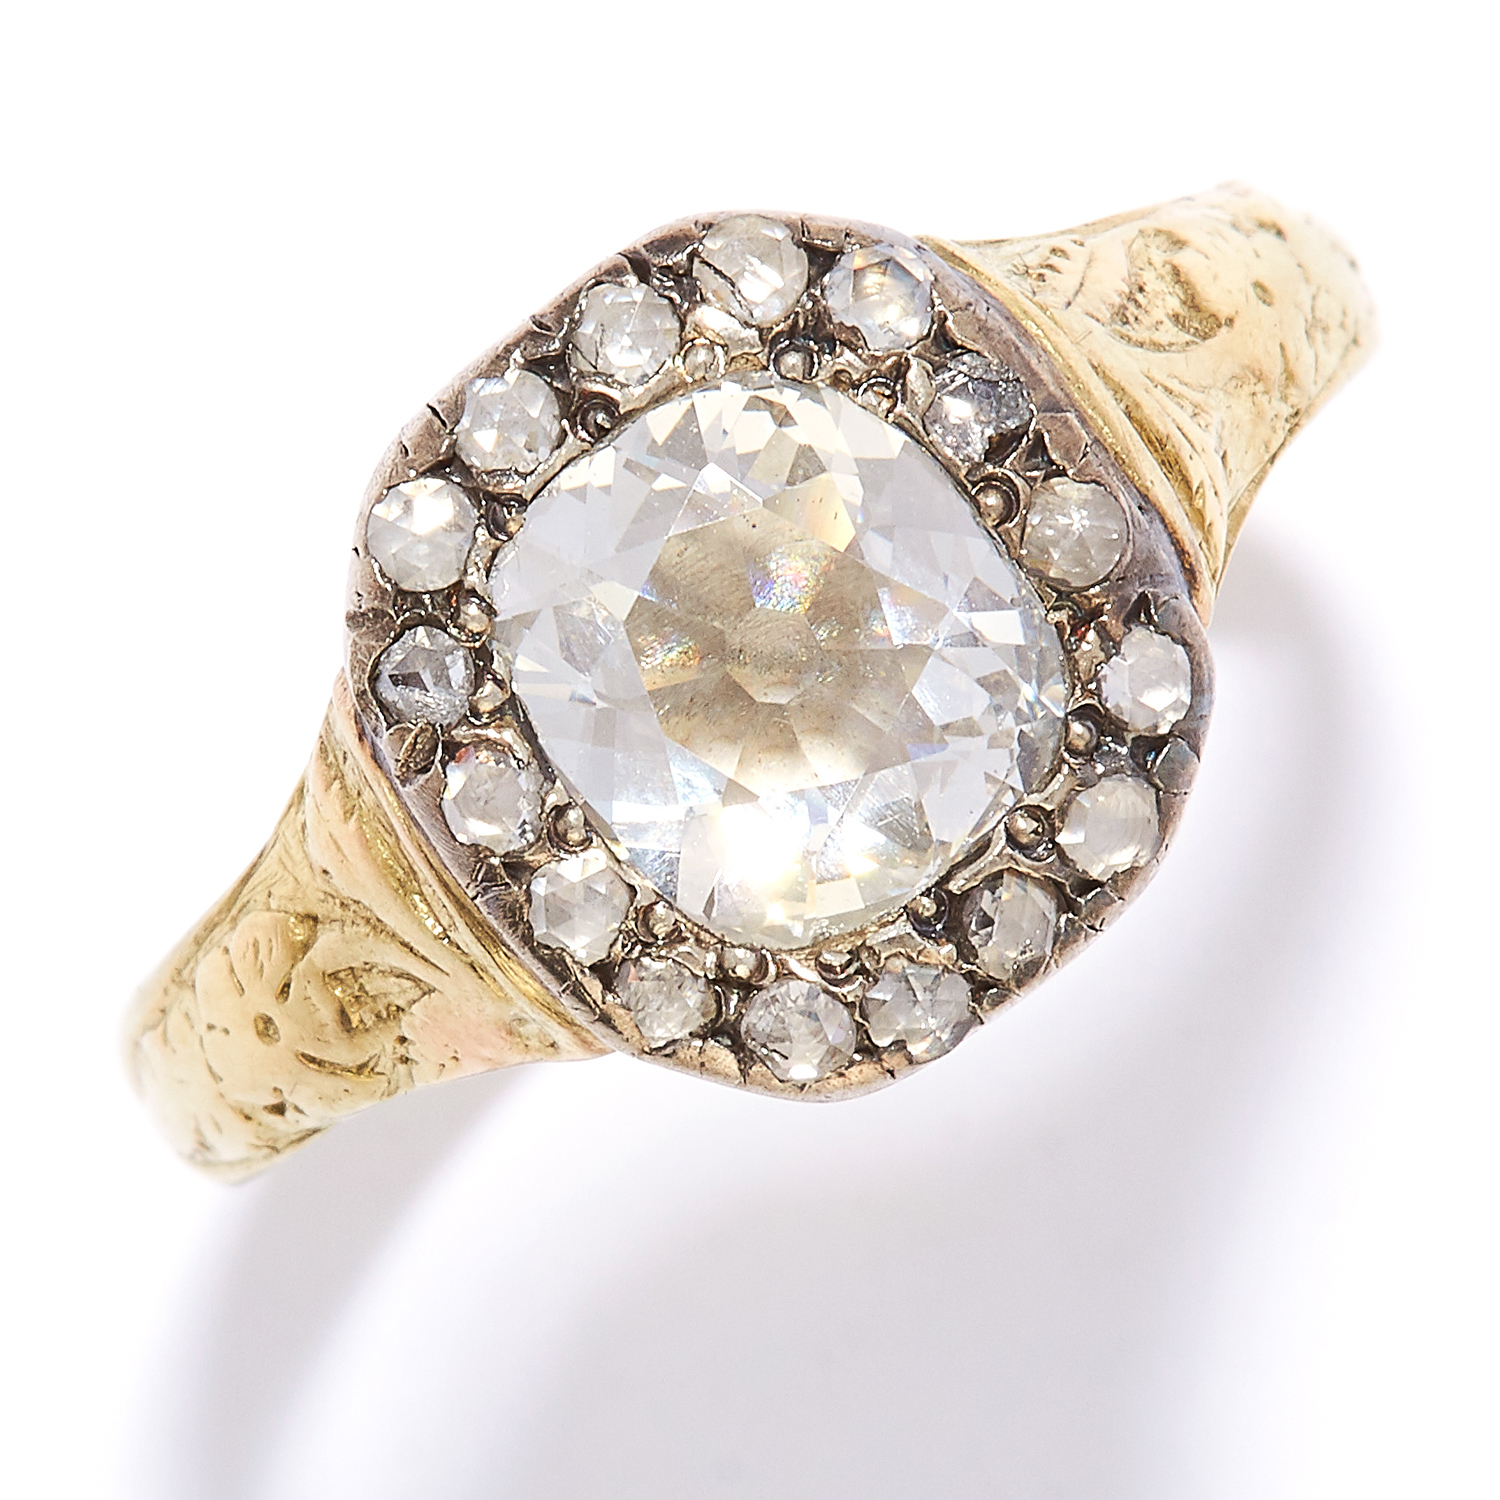 ANTIQUE DIAMOND CLUSTER RING in high carat yellow gold and silver, the old mine cut diamond of